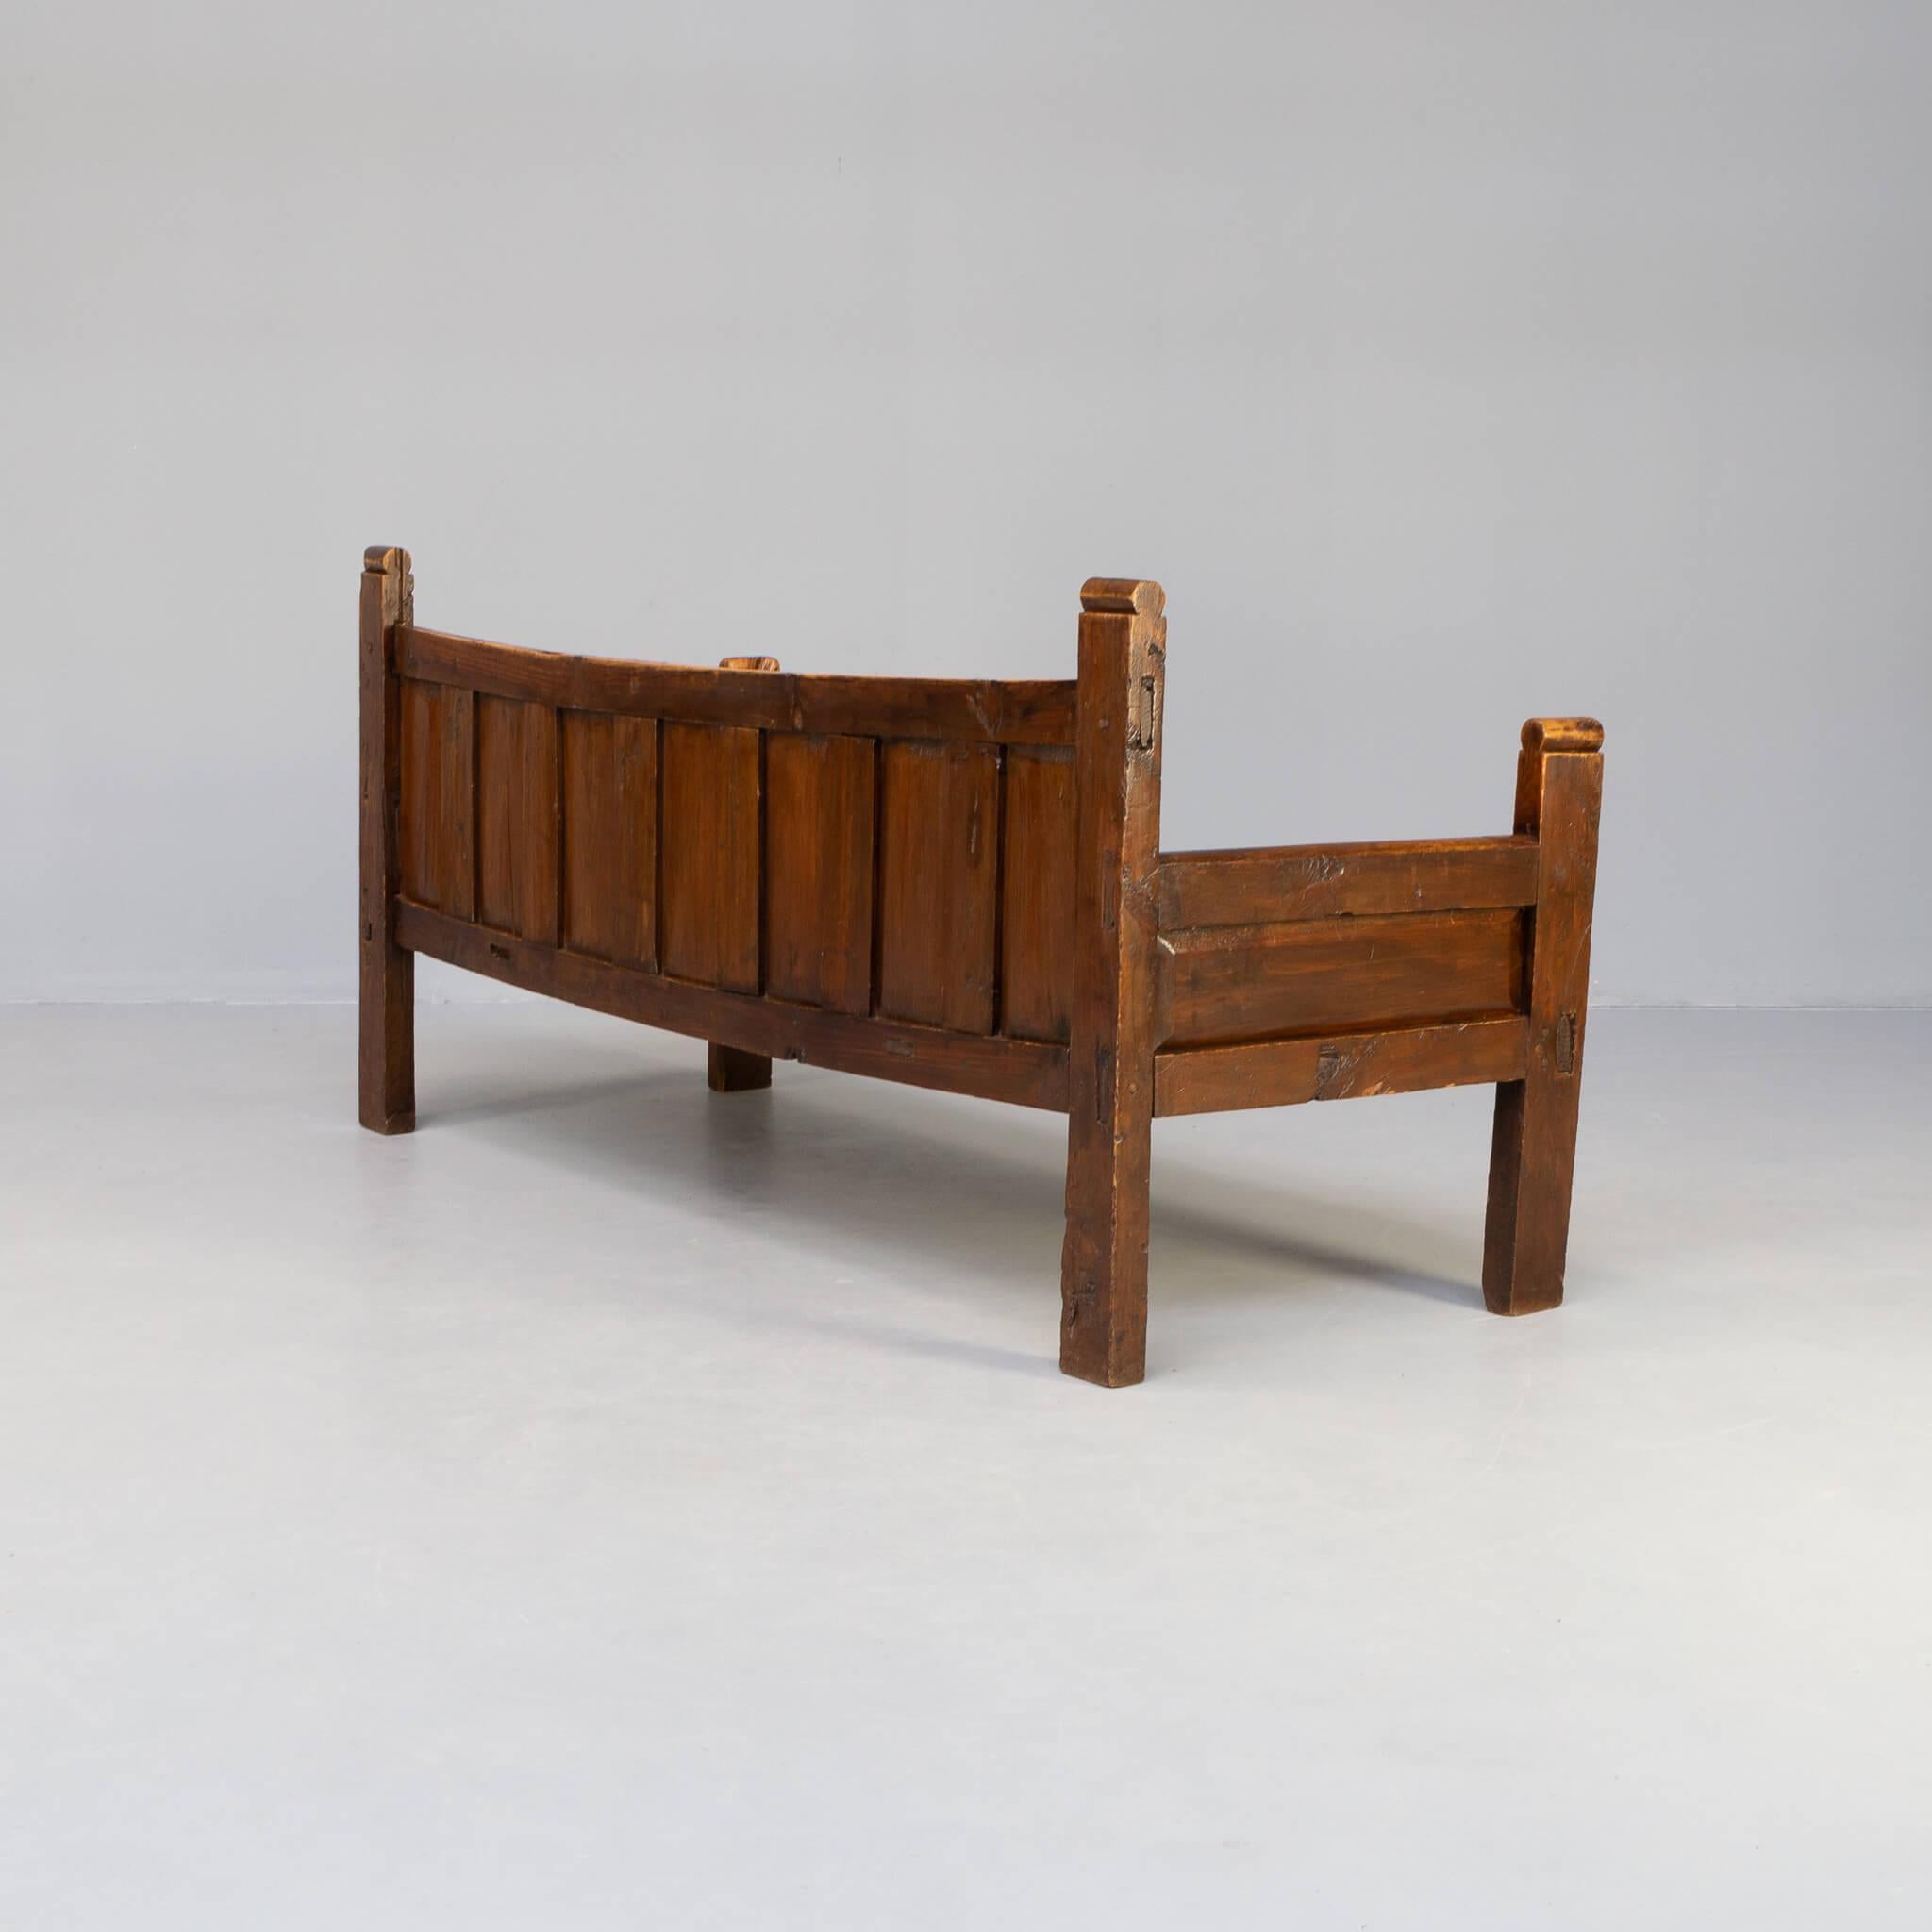 19th Century Rustic Oak Wooden Bench For Sale 2